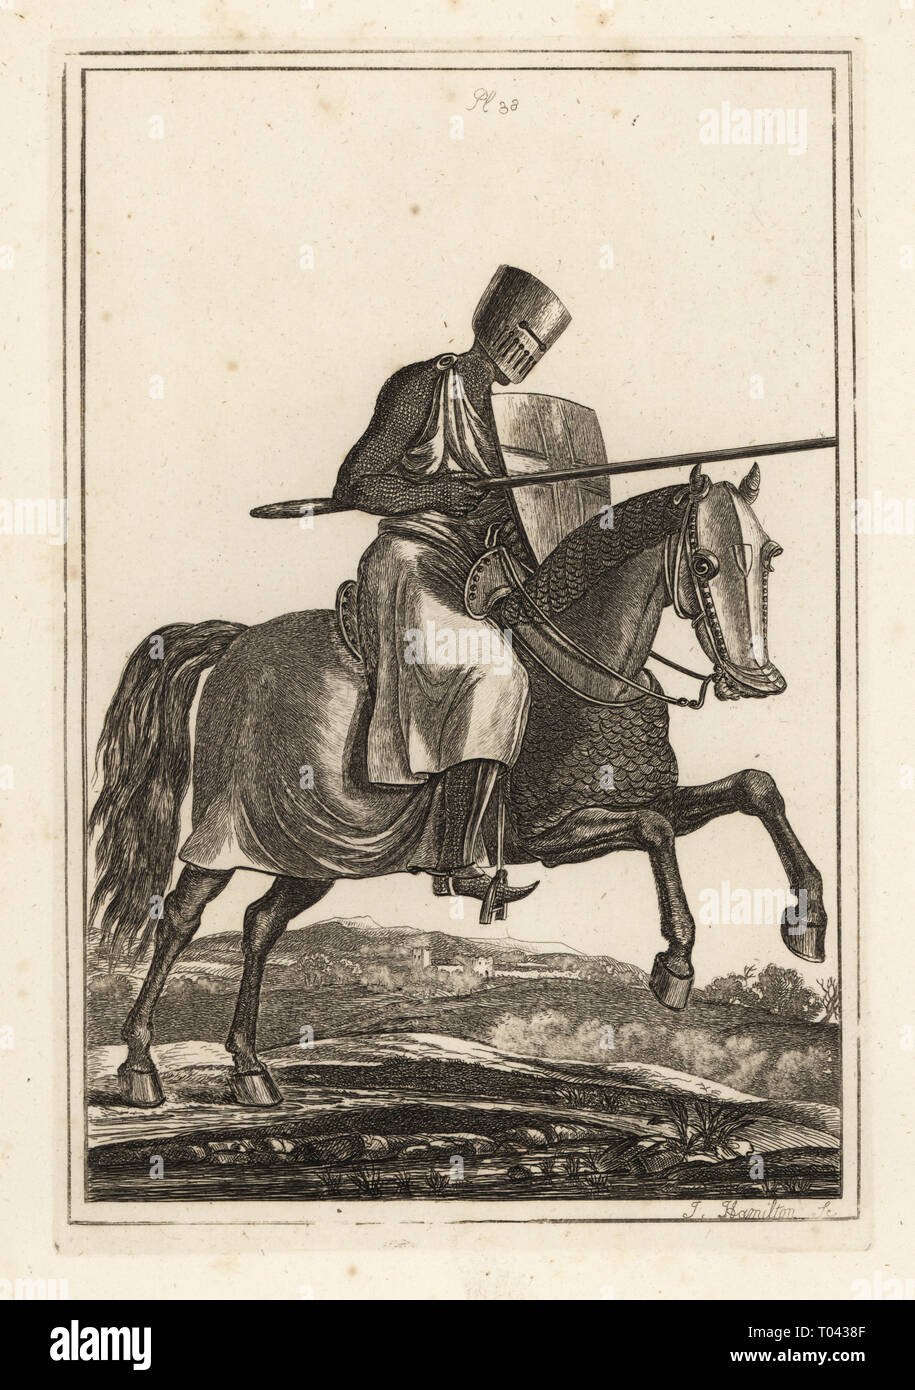 Charging knight of the 12th and 13th century in chainmail hawberk, flat helmet, lance, heater shield, shin armour jambesons, war saddle. Copperplate engraving by J. Hamilton from Francis Grose's Military Antiquities respecting a History of the English Army, Stockdale, London, 1812. Stock Photo